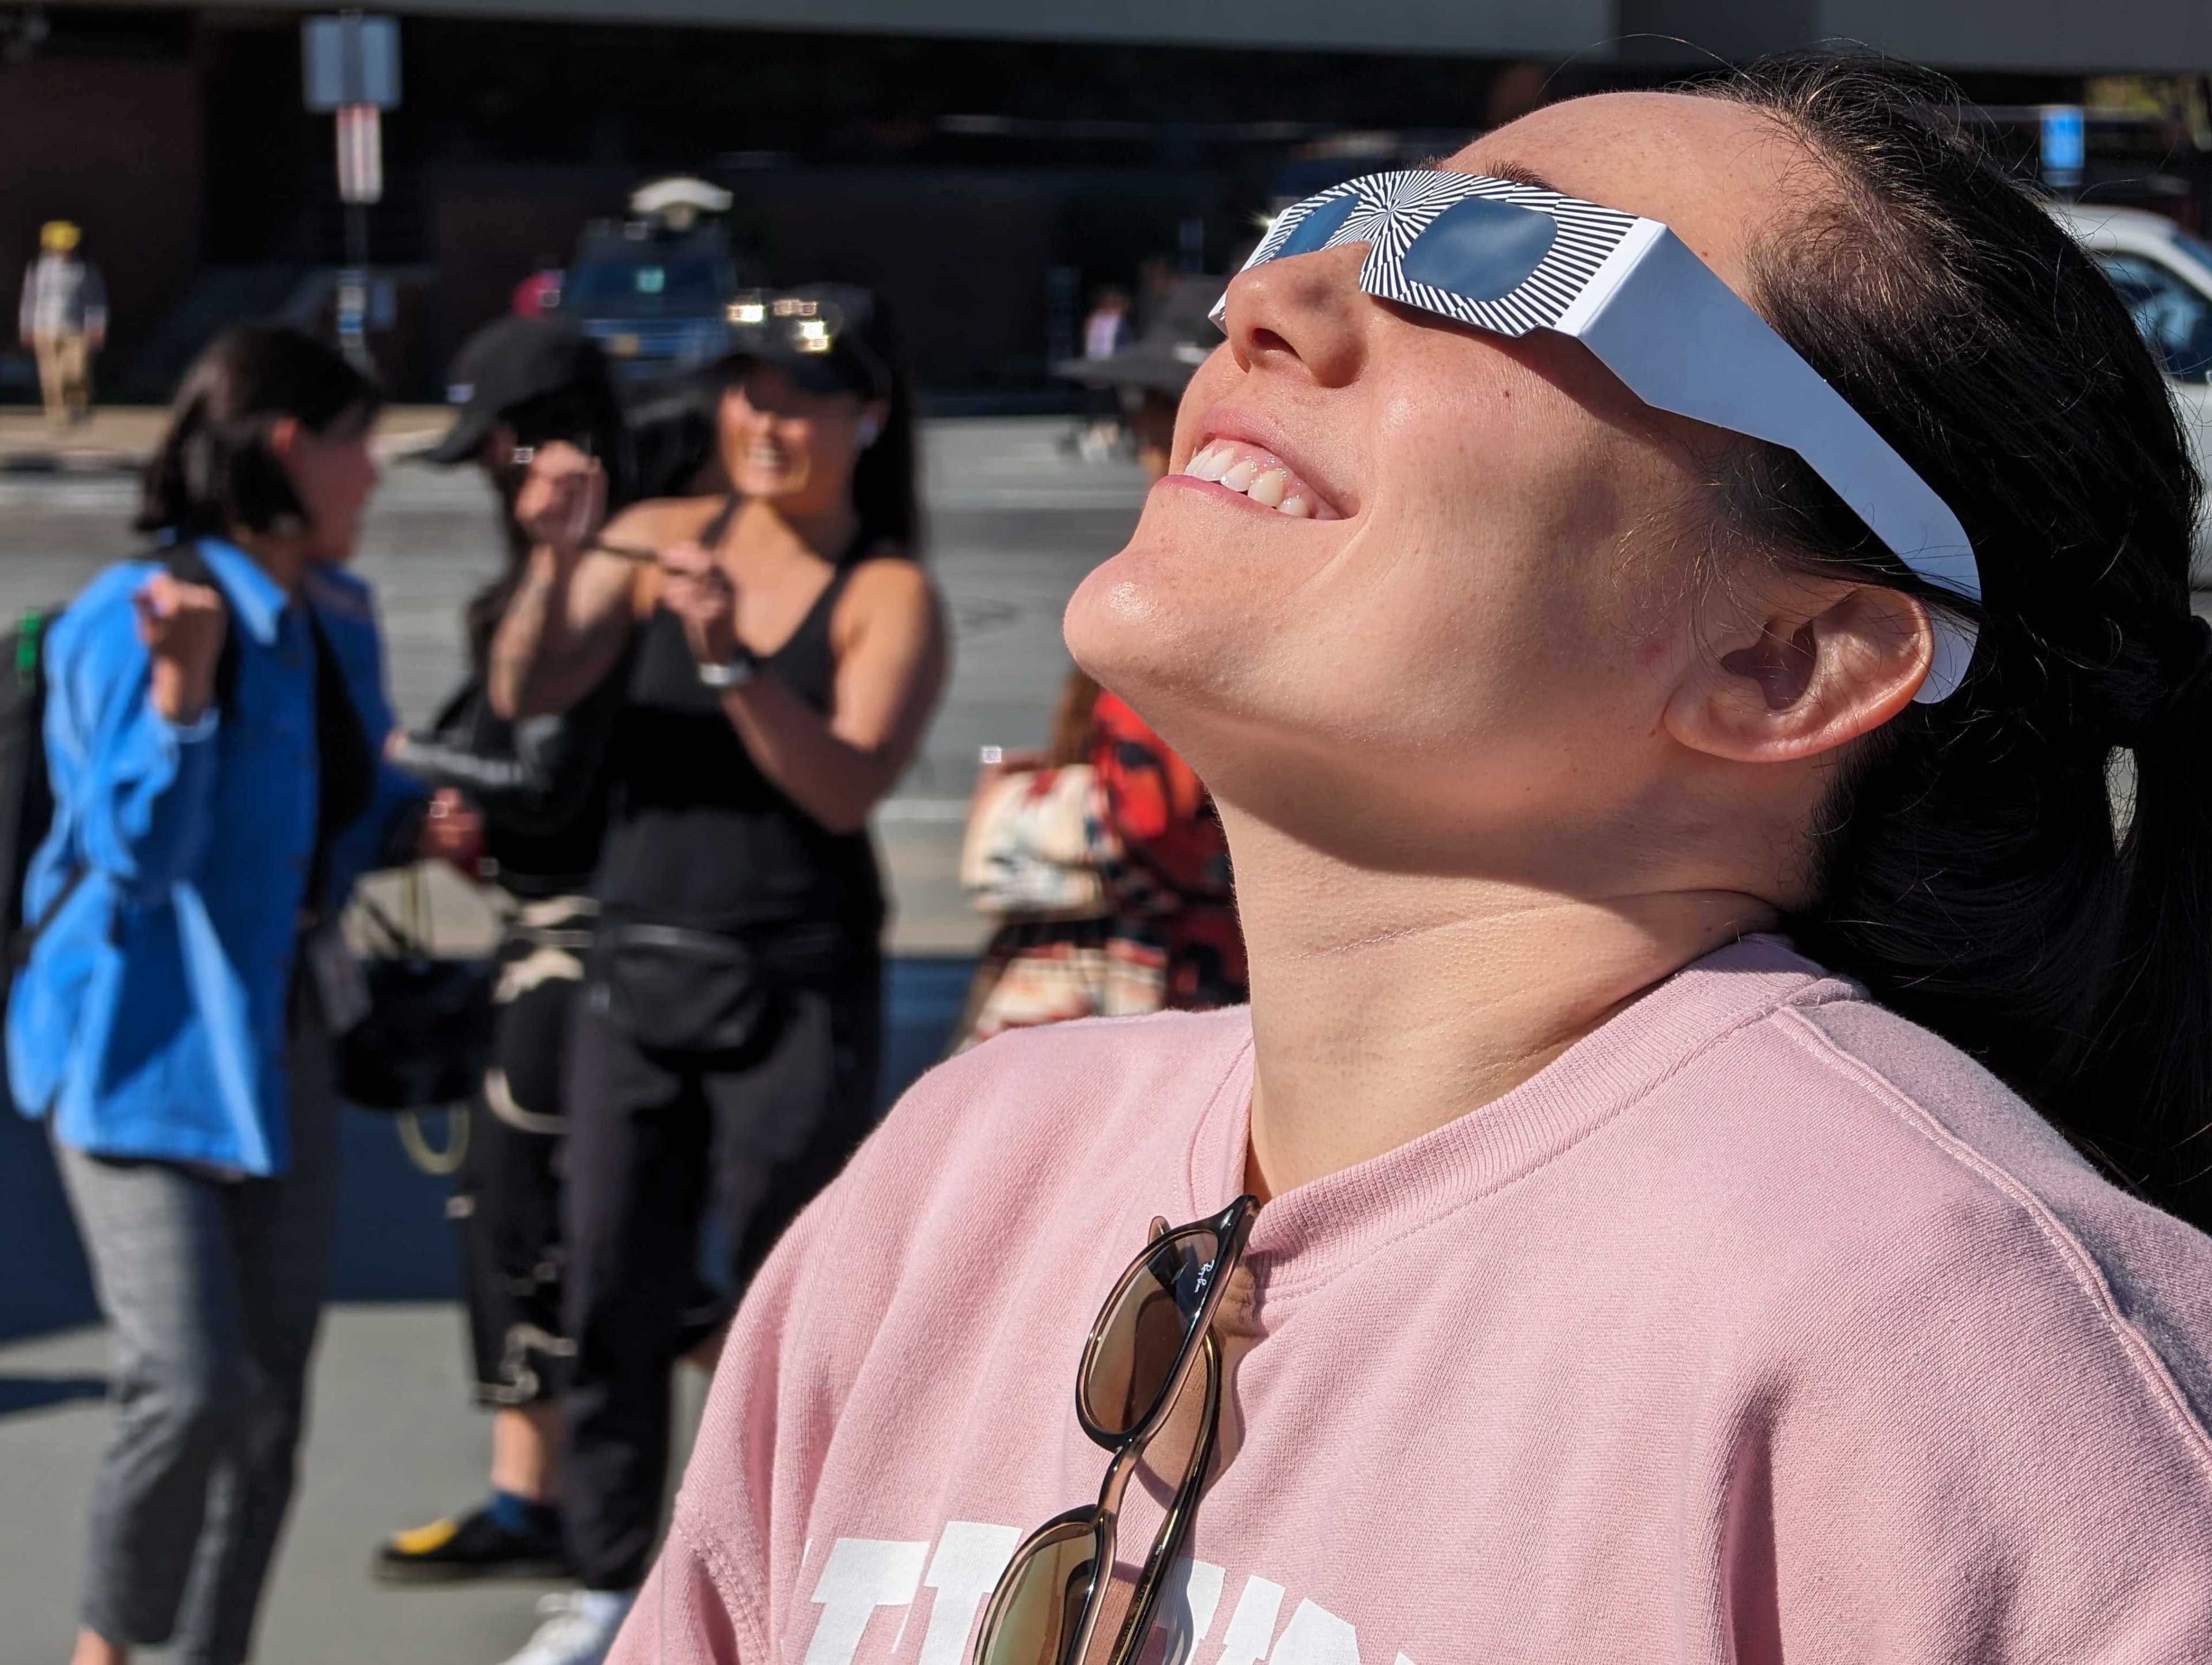 A smiling woman wearing unique sunglasses looks up, with blurred people in the background.